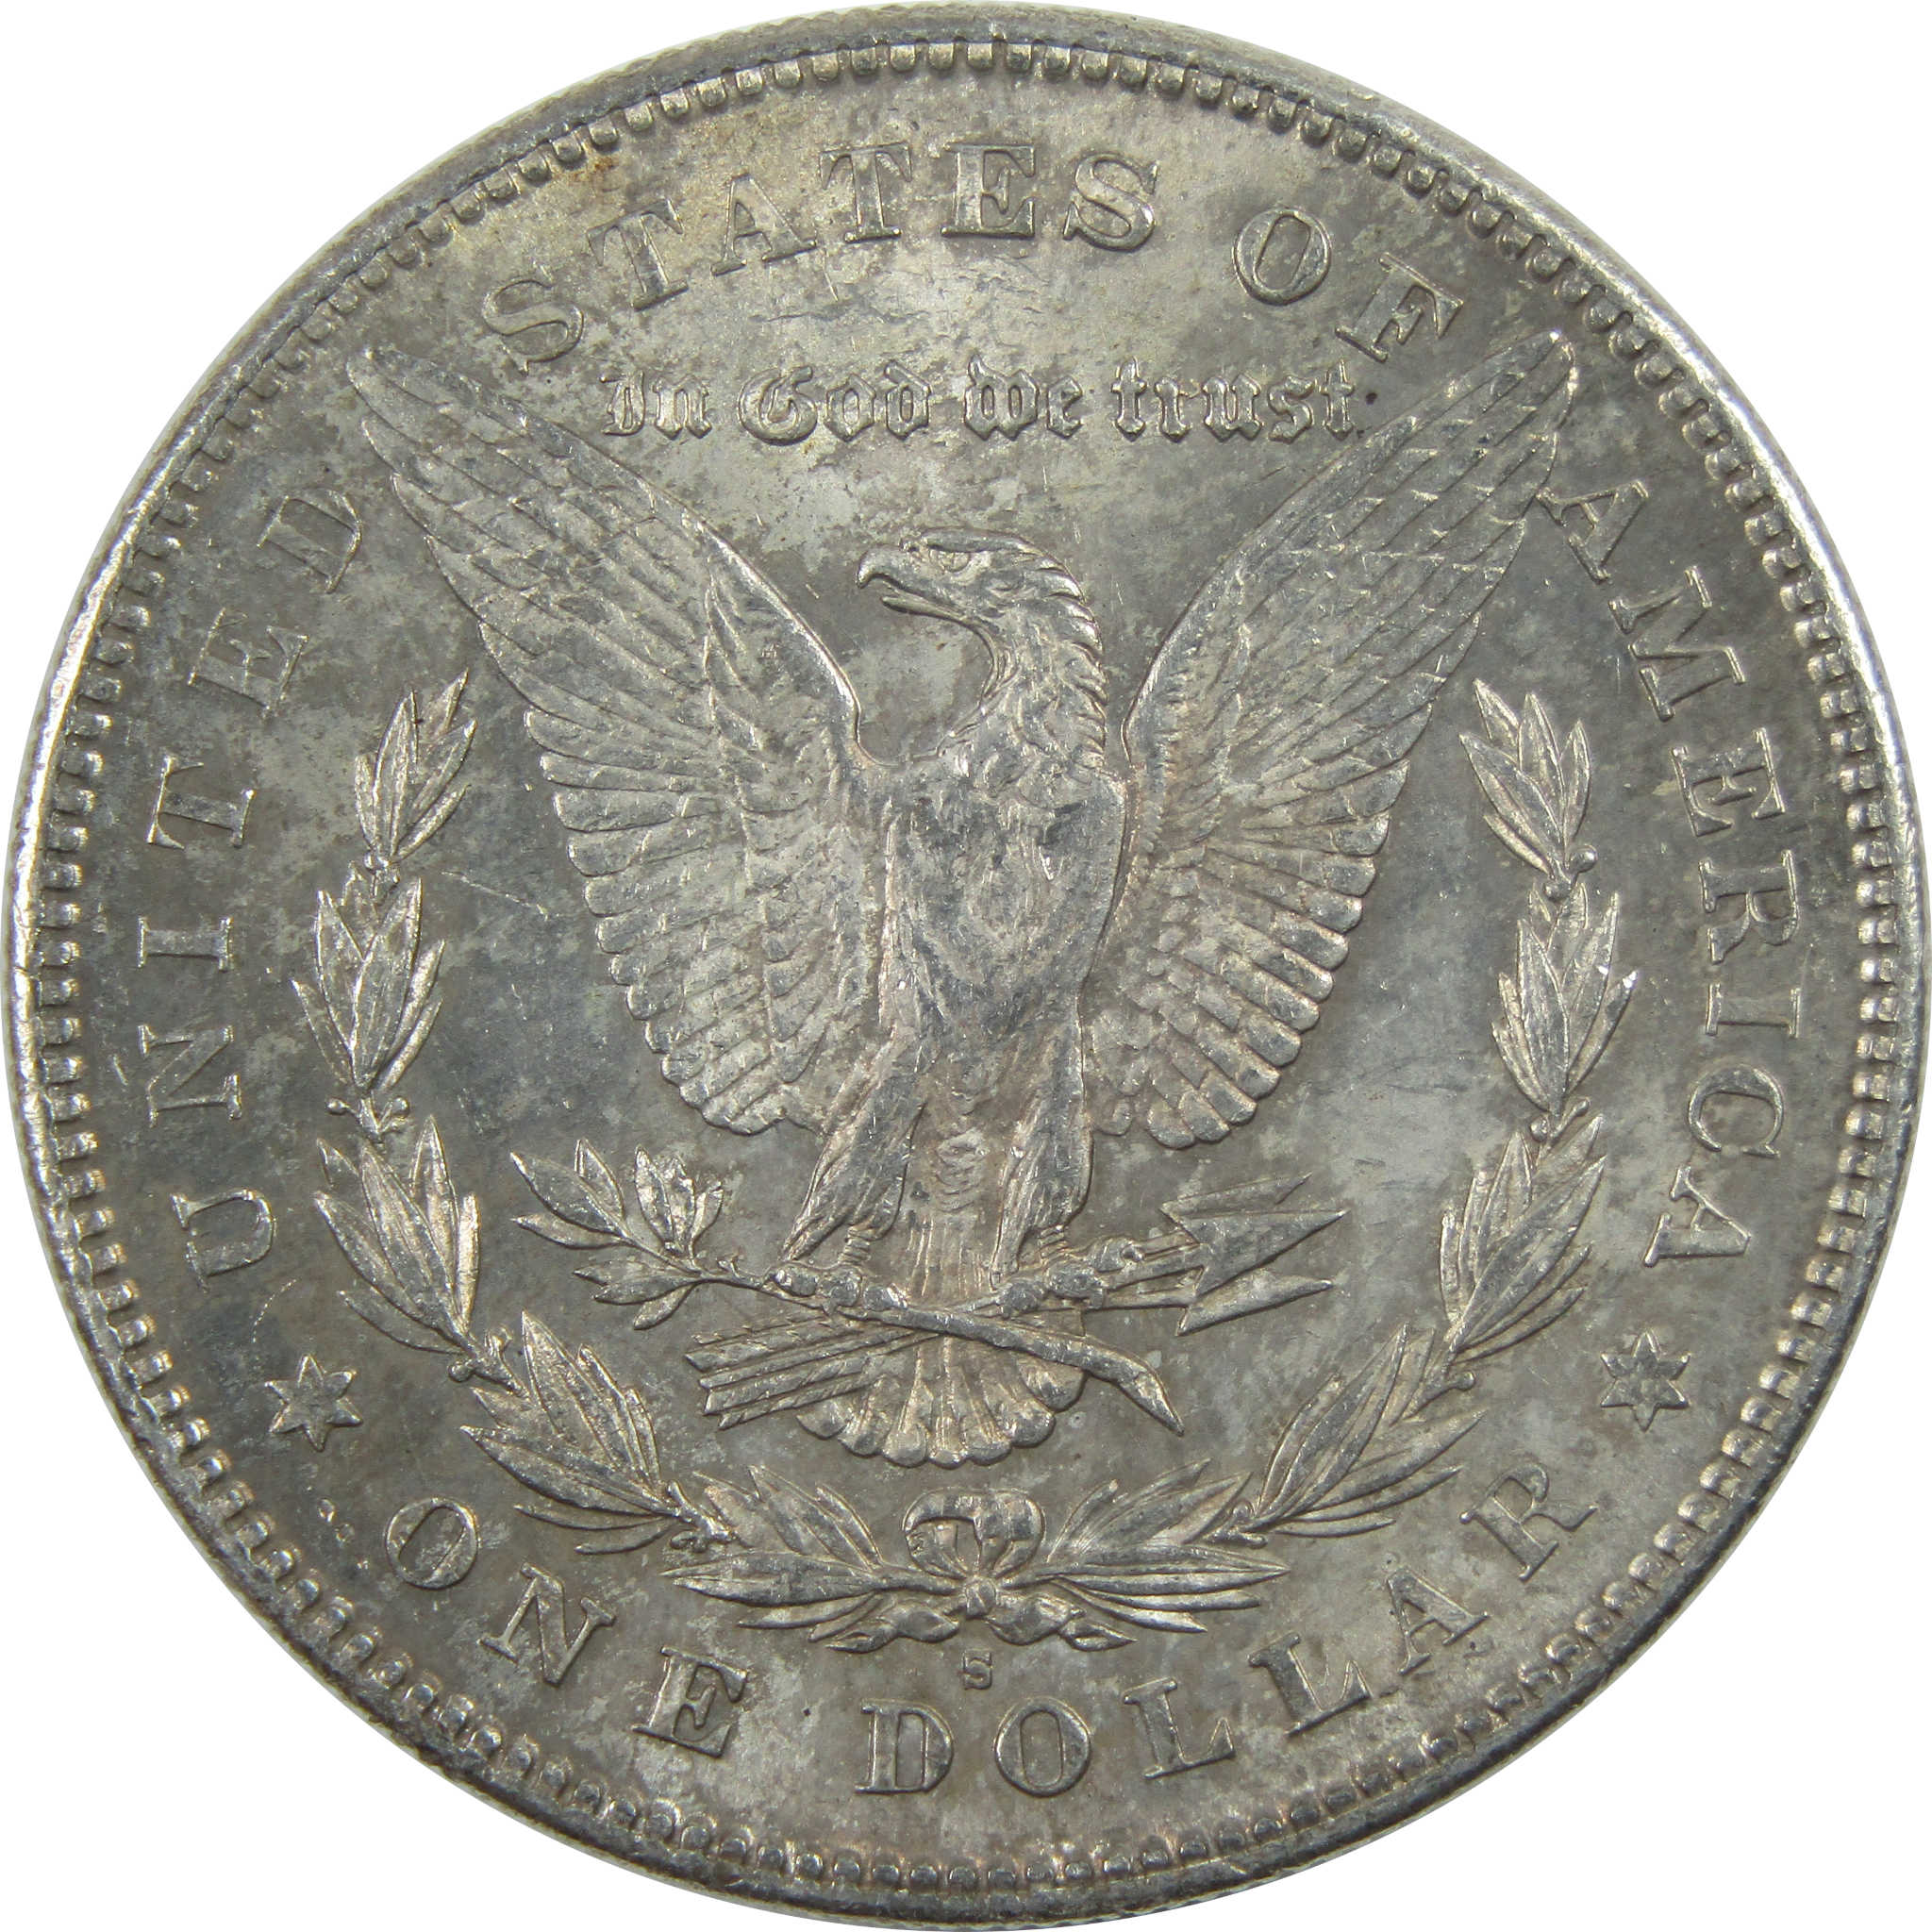 1878 S Morgan Dollar AU About Uncirculated Silver $1 Coin SKU:I11683 - Morgan coin - Morgan silver dollar - Morgan silver dollar for sale - Profile Coins &amp; Collectibles